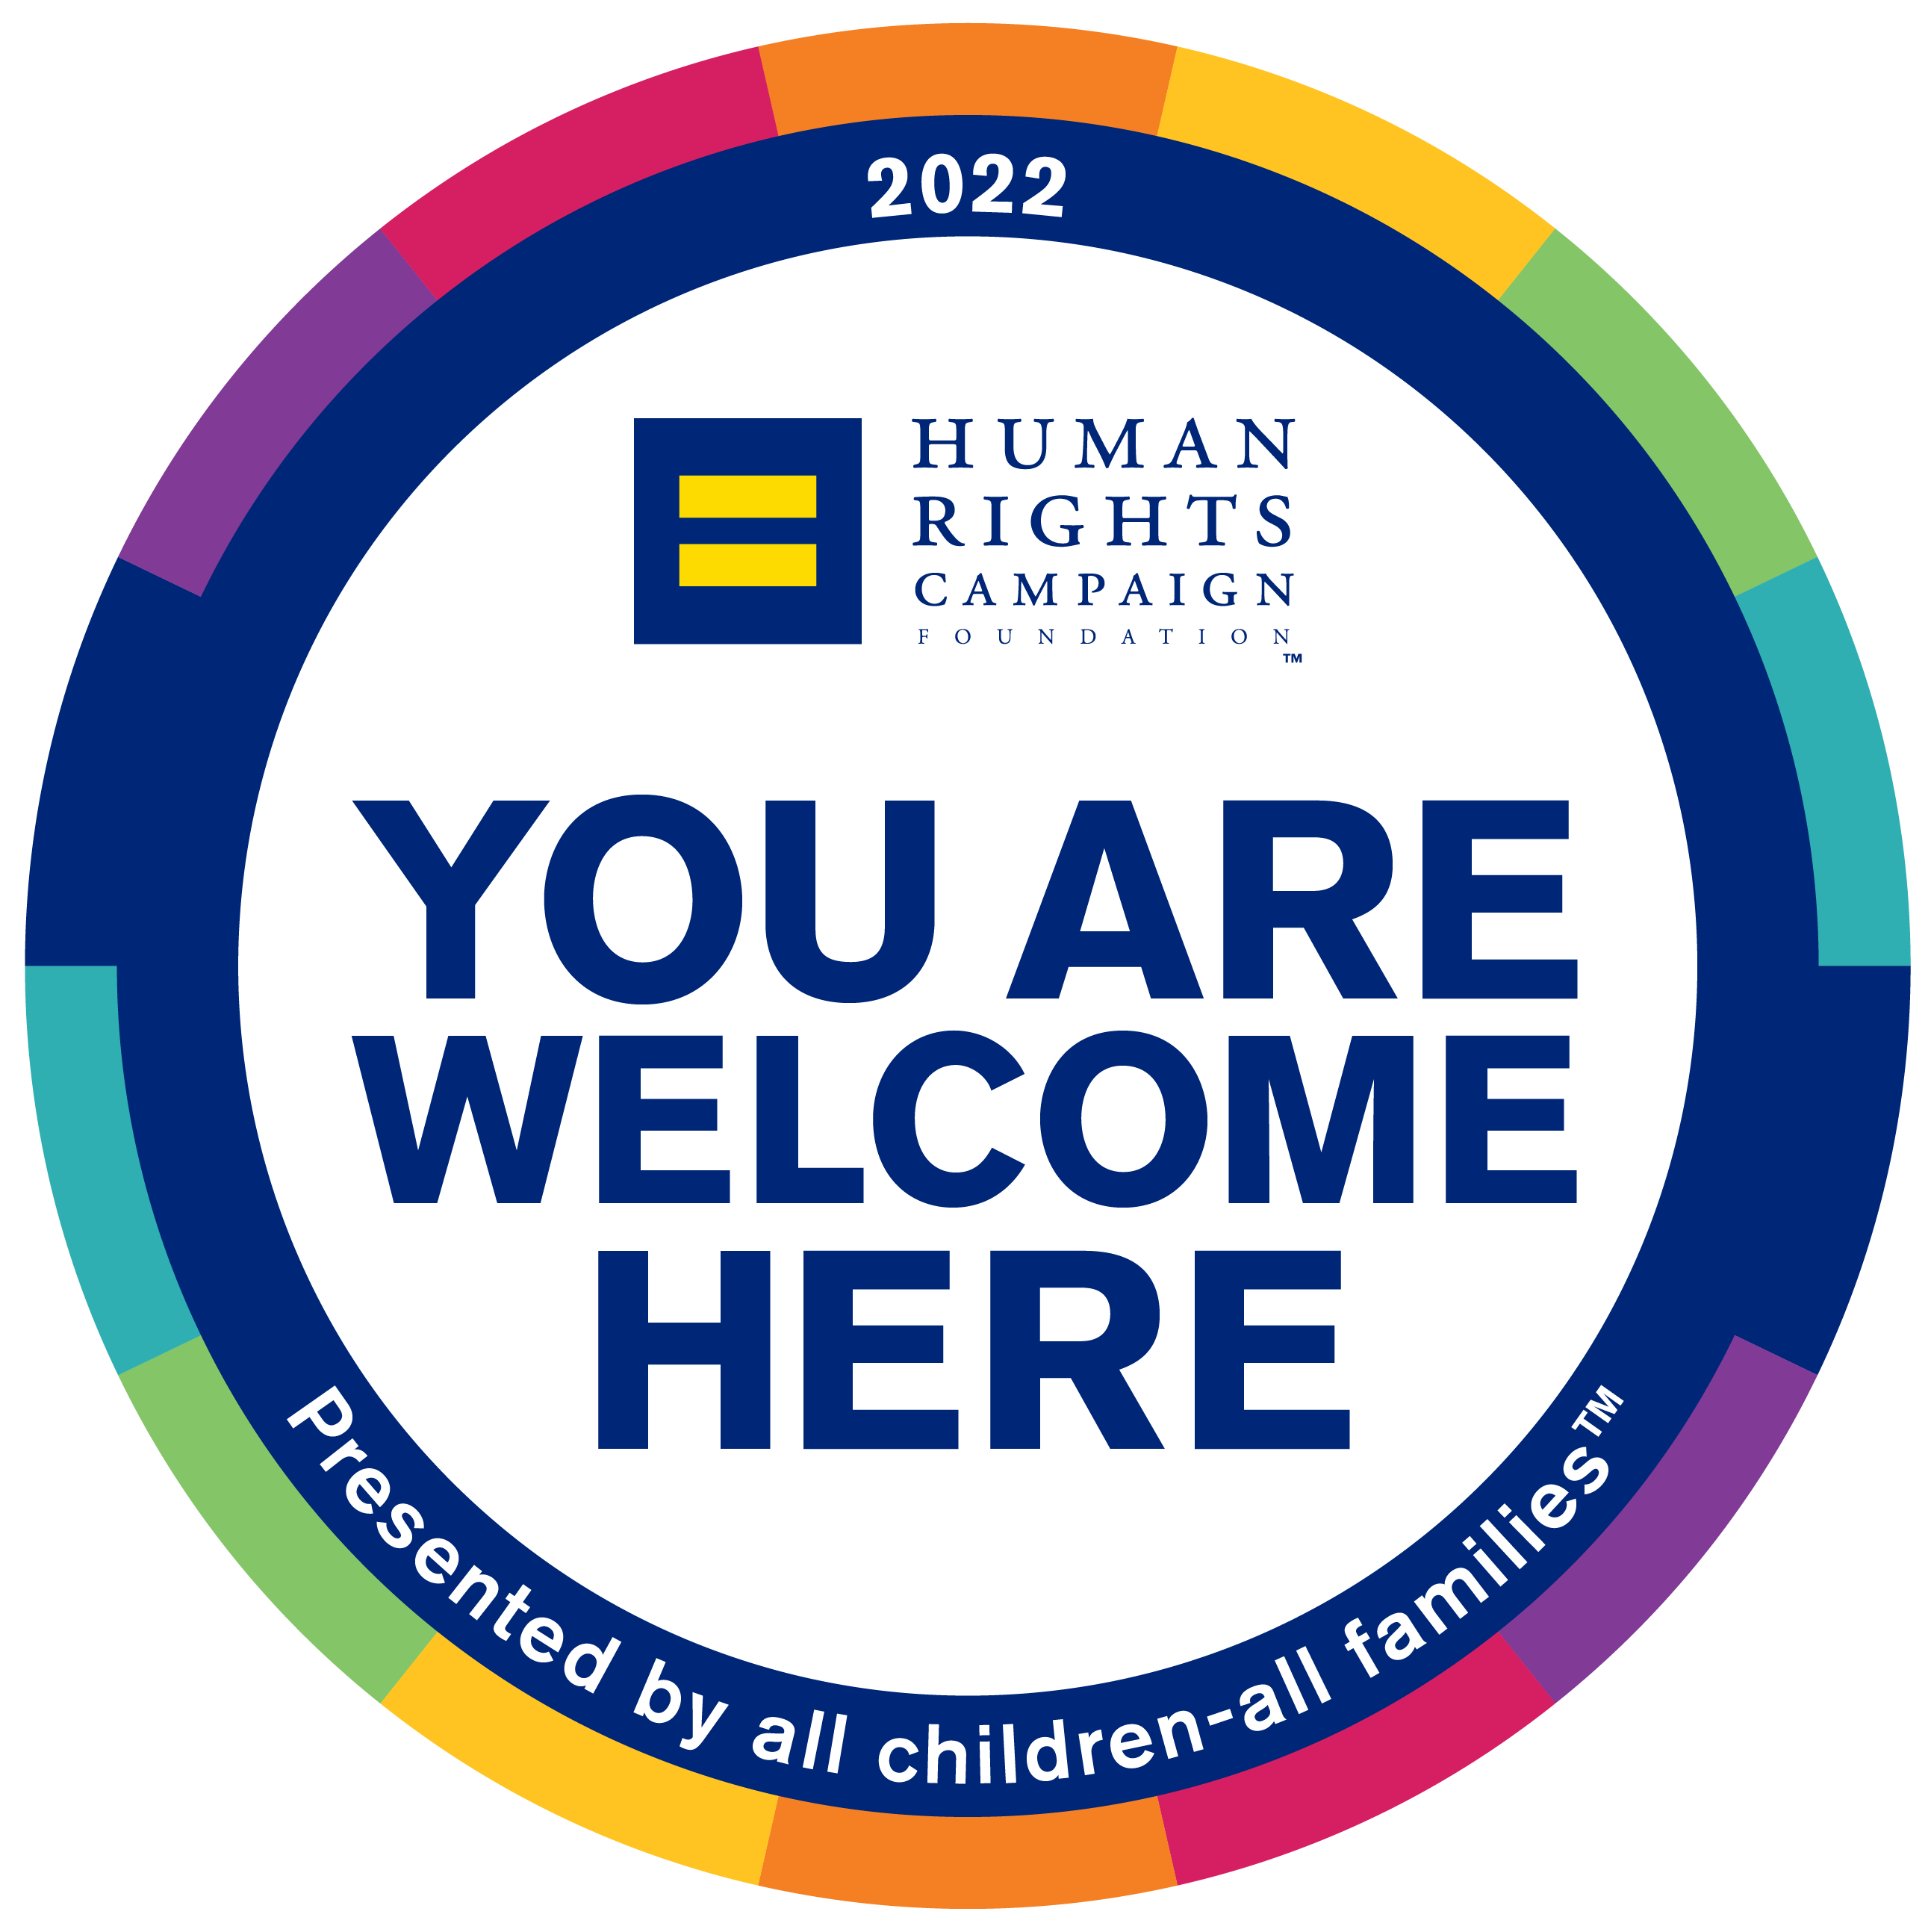 Human Rights Campaign "You Are Welcome Here" presented by ACAF